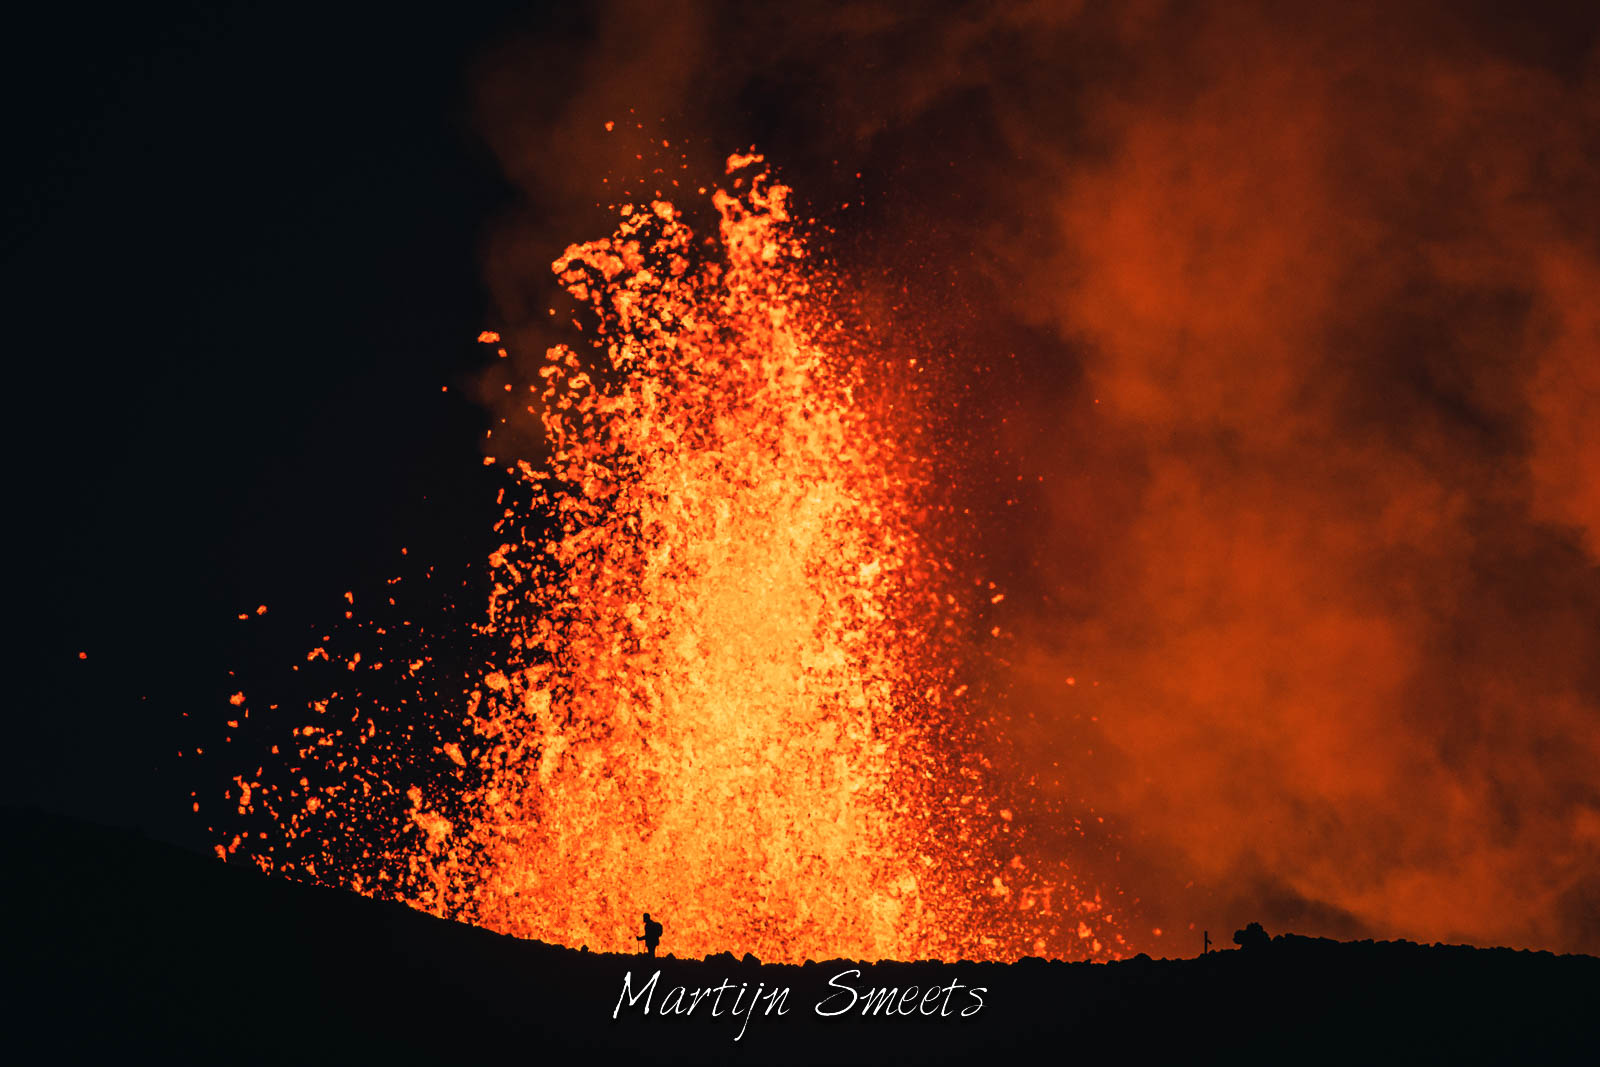 Spectator in front of a lava fountain of the Fagradalsfjall volcano in Iceland